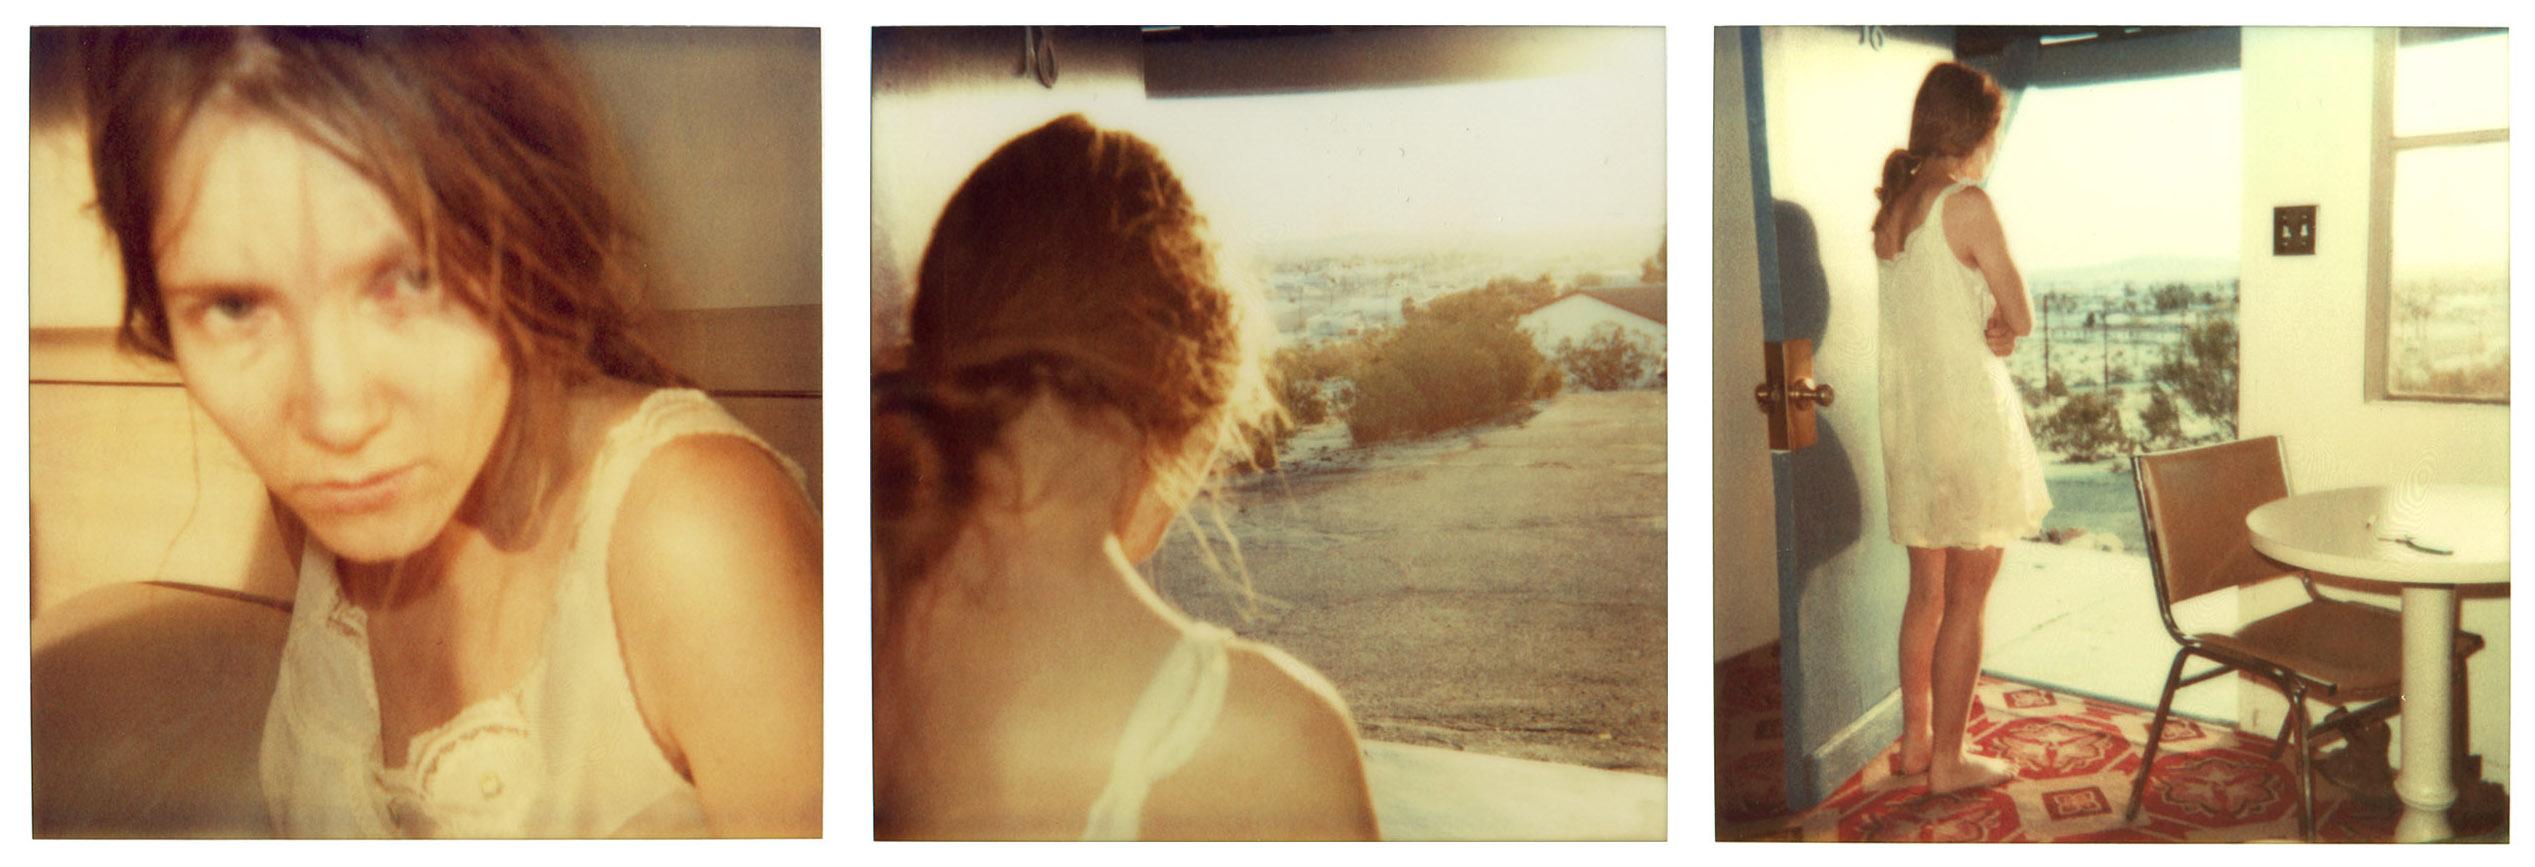 Hillview Motel (Last Picture Show) - analog, vintage, based on 3 Polaroids